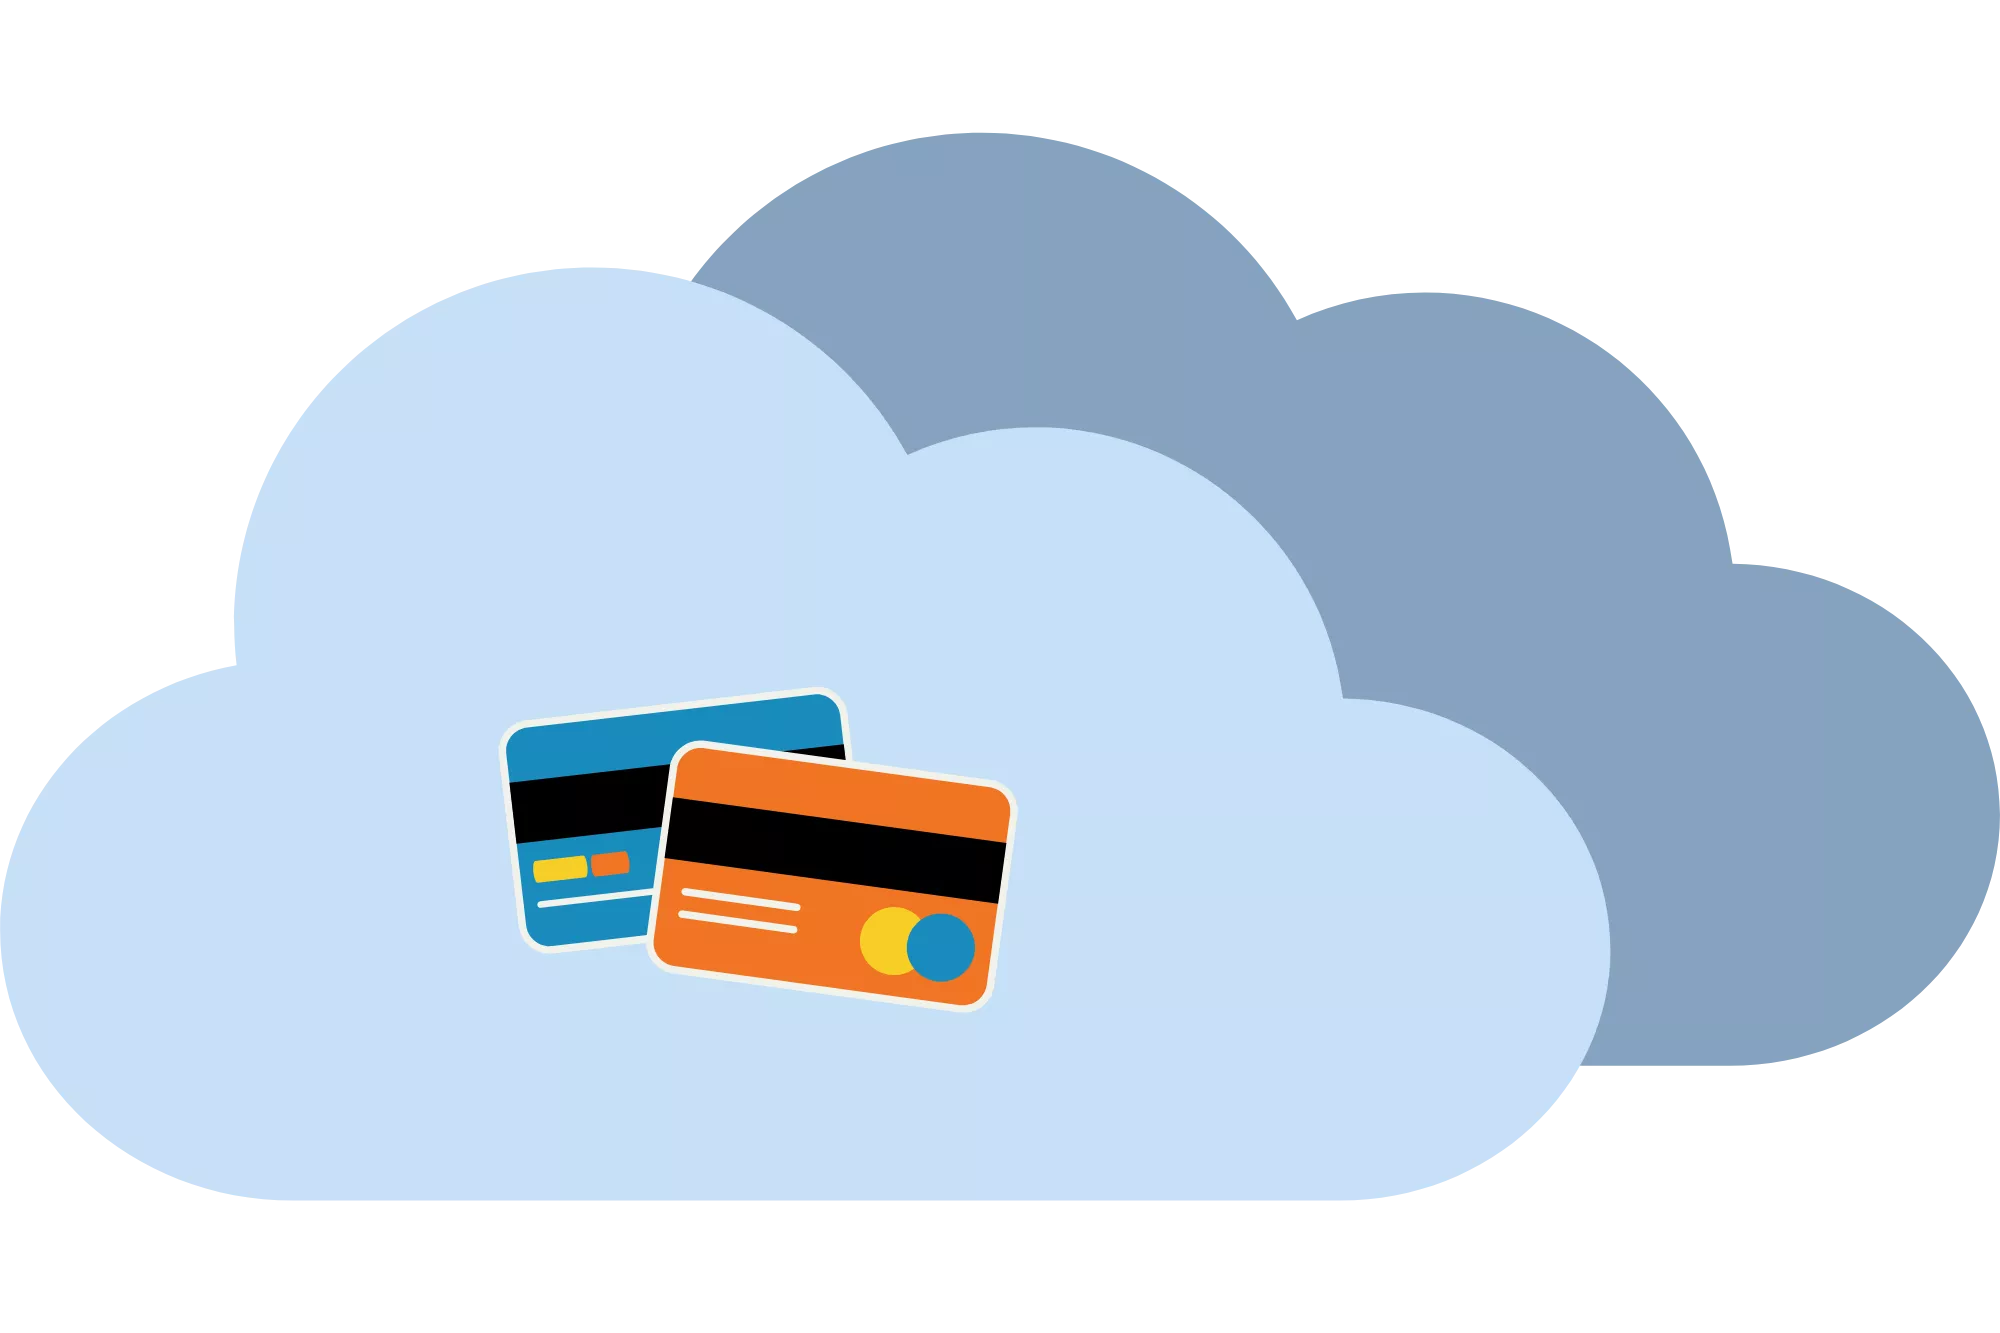 A cloud with credit cards in it to represent using Mastercard SecureCode for eCommerce transactions.